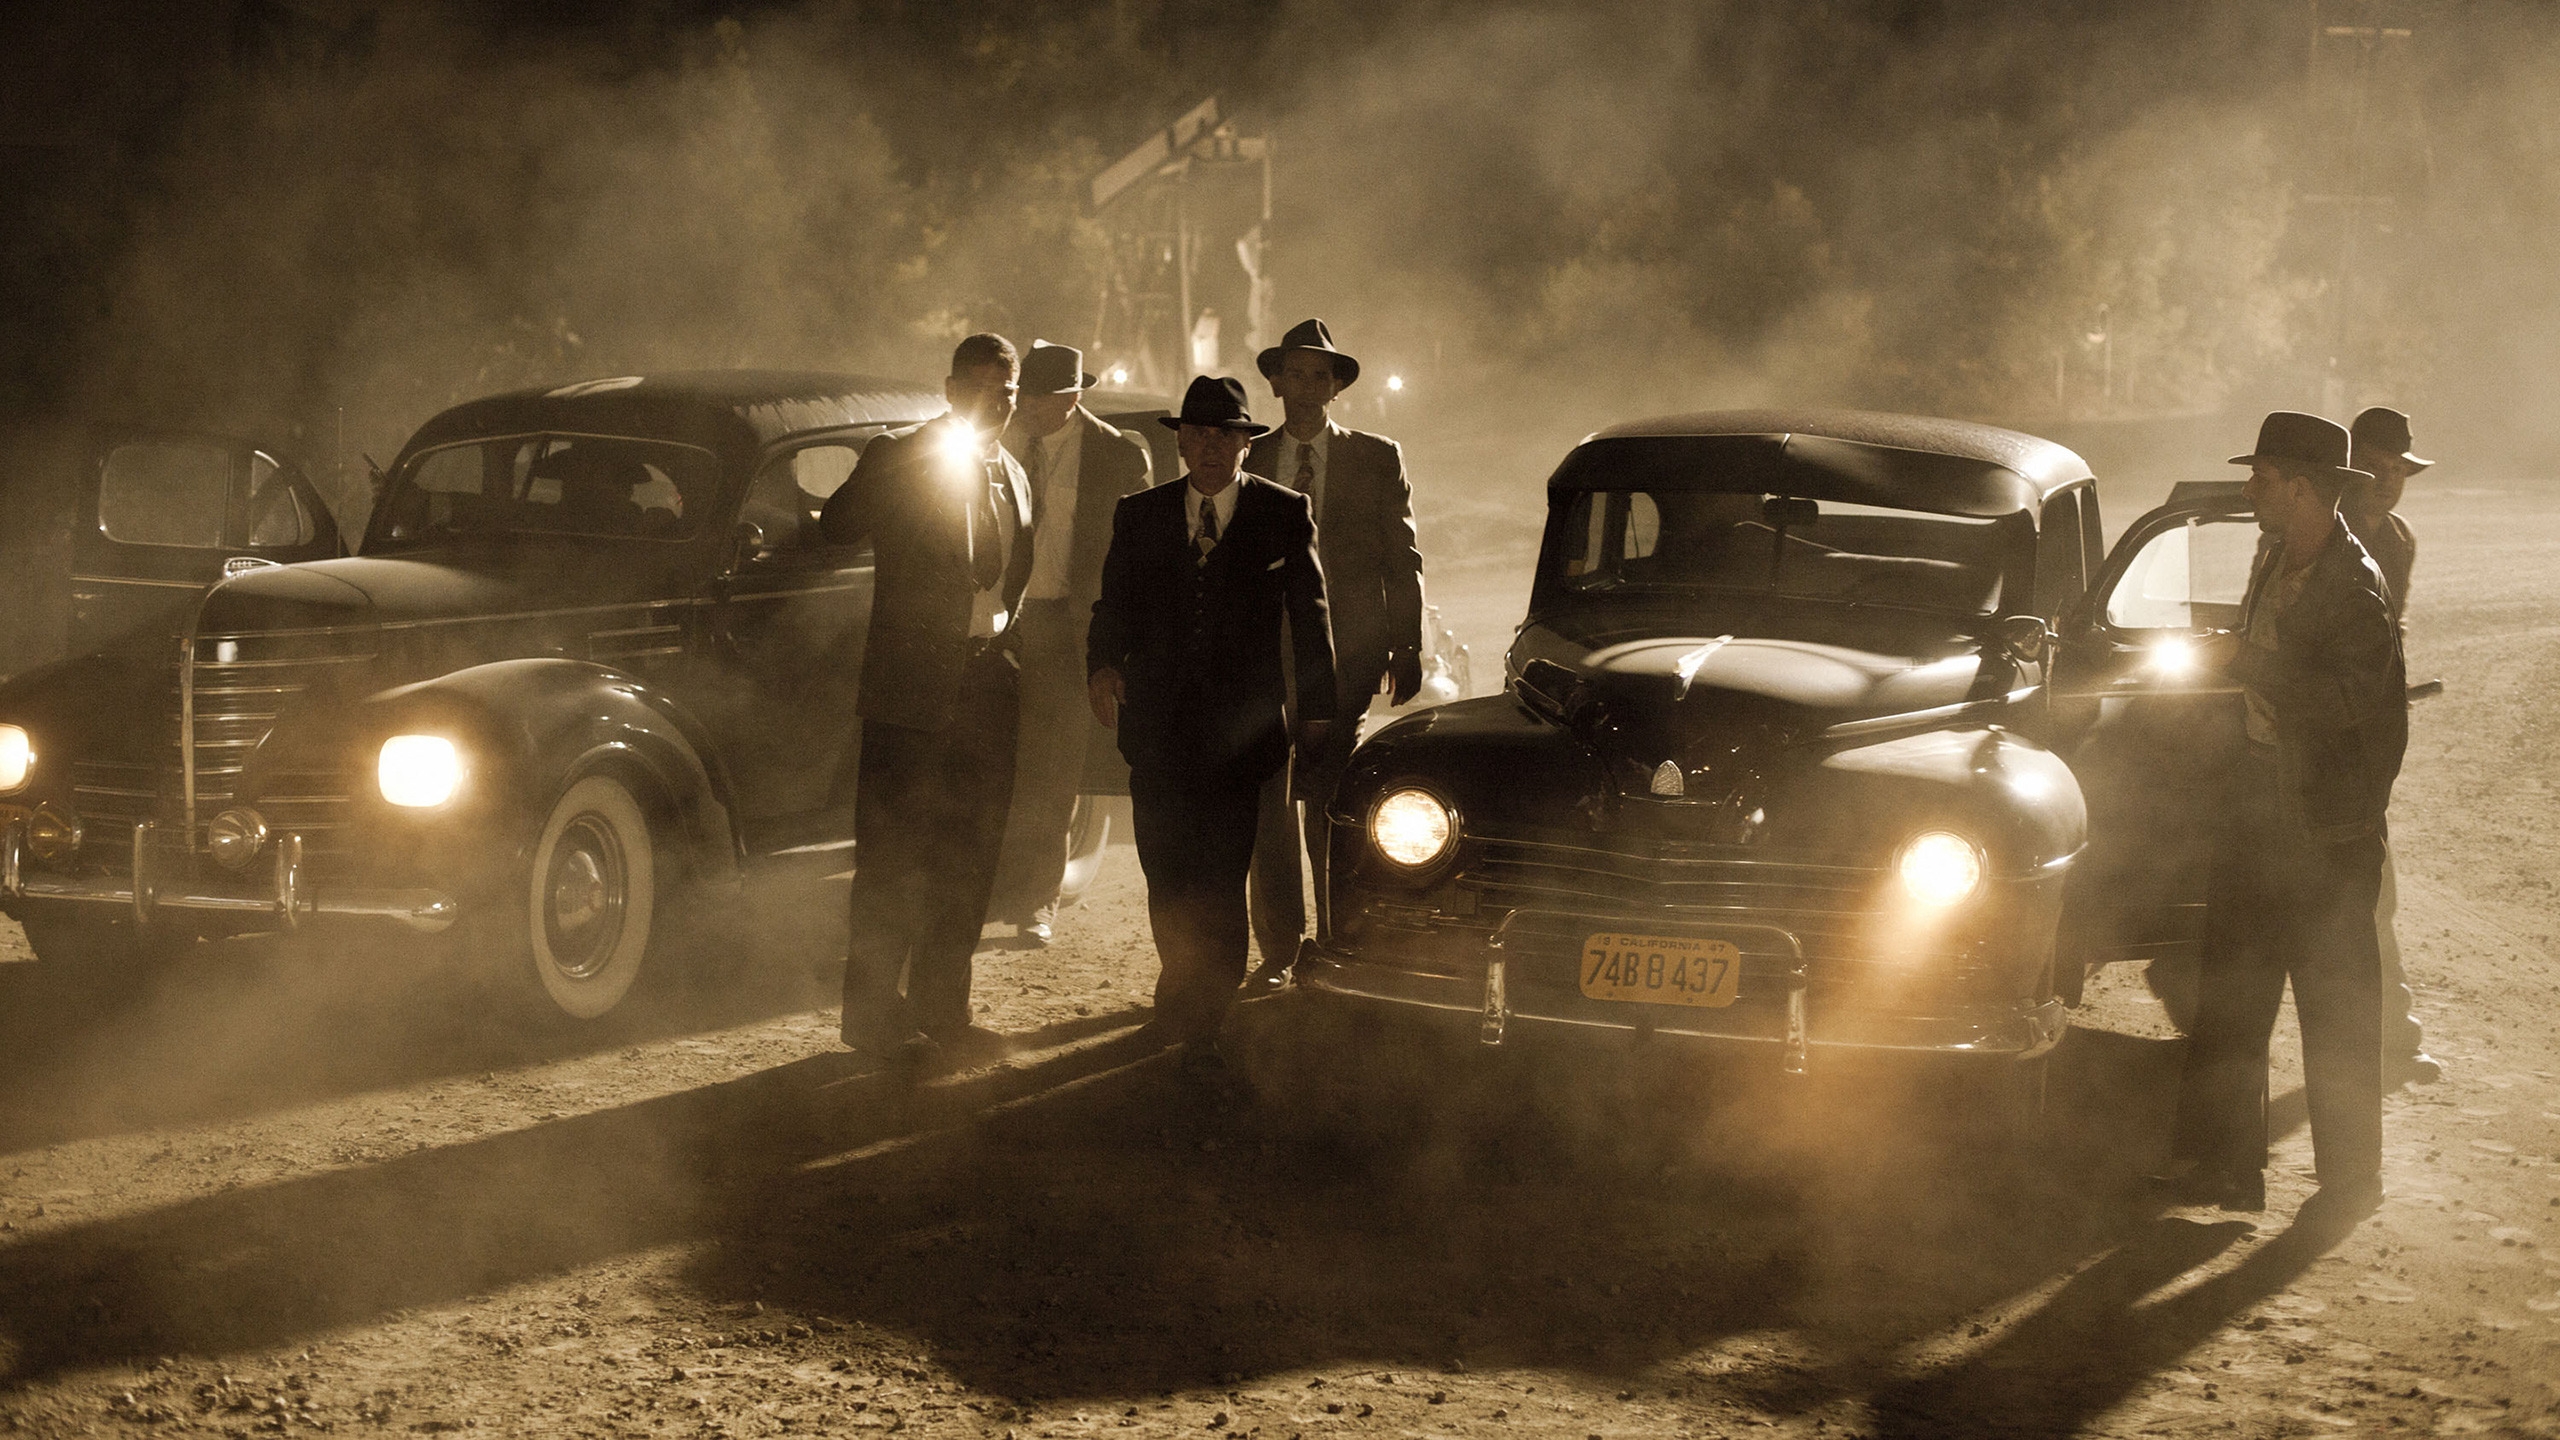 Mob City Tv Show for 2560x1440 HDTV resolution